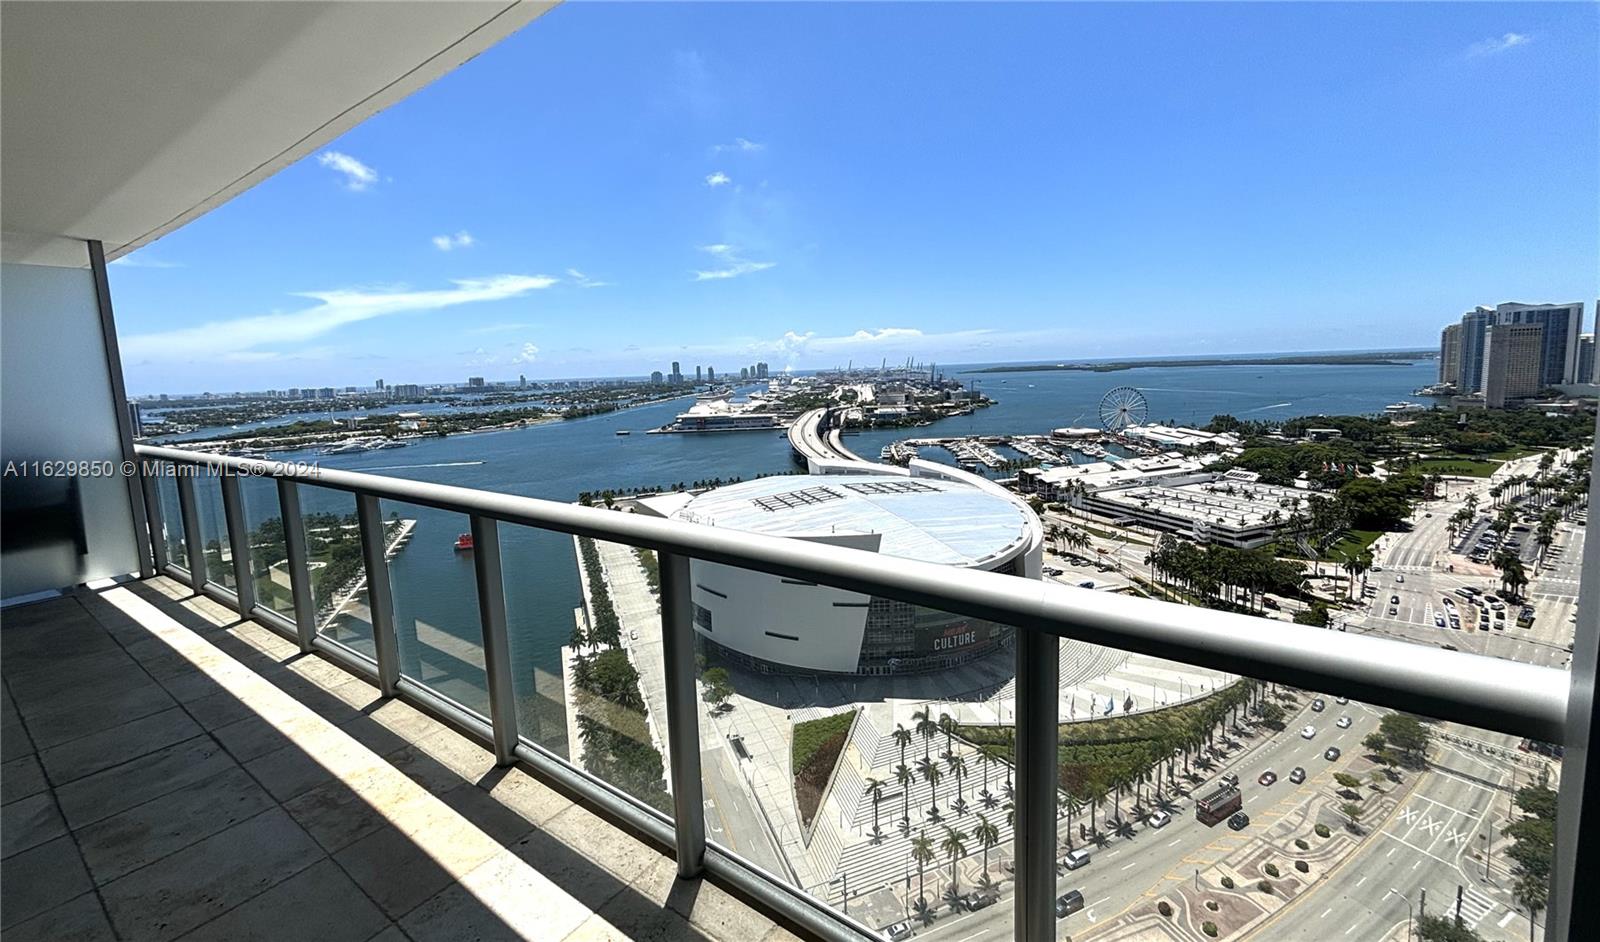 This fantastic unit offers stunning views of Biscayne Bay and features 2 bedrooms, 2 full bathrooms, and modern amenities such as Marble floors, kitchen cabinets, and a spa-like master bathroom. The building, Marina Blue, provides a range of luxurious amenities, including two pools, hot tubs, 24-hour security, and a fitness center, making it an ideal location for those who want to live life to the fullest. Additionally, the building's proximity to several popular attractions, including the Miami Dade Arena, Adrienne Arsht Center, and Perez Art Museum, makes it an excellent choice for anyone who wants to be in the heart of the action.